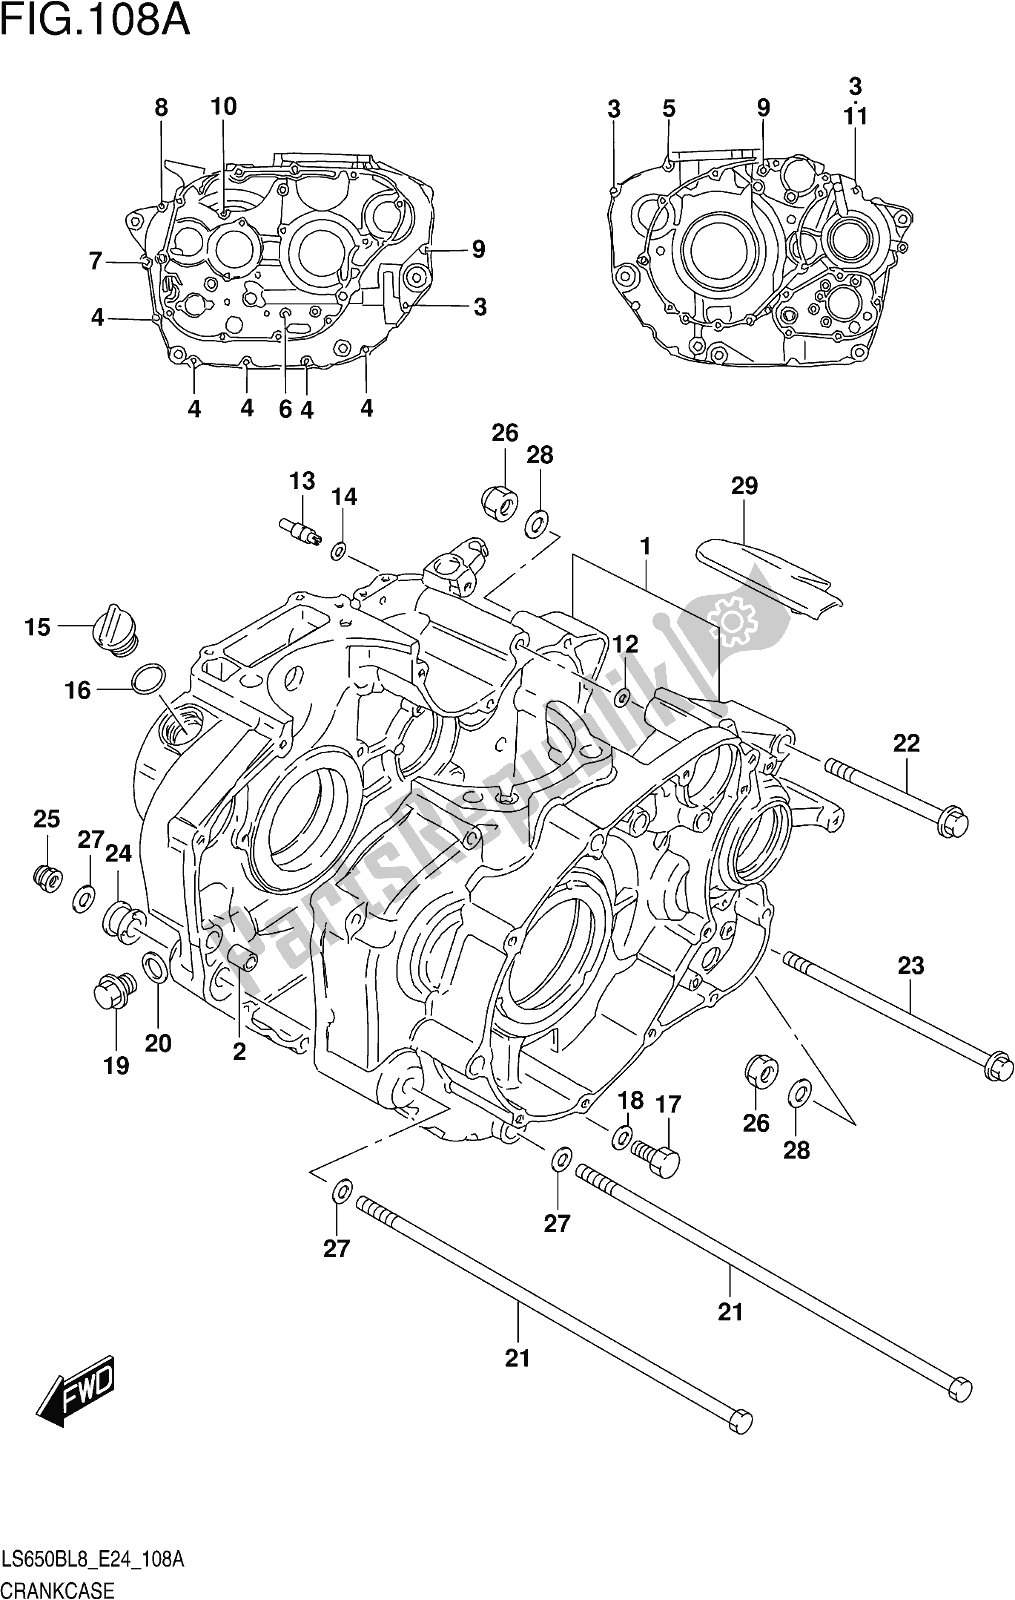 All parts for the Fig. 108a Crankcase of the Suzuki LS 650B 2018